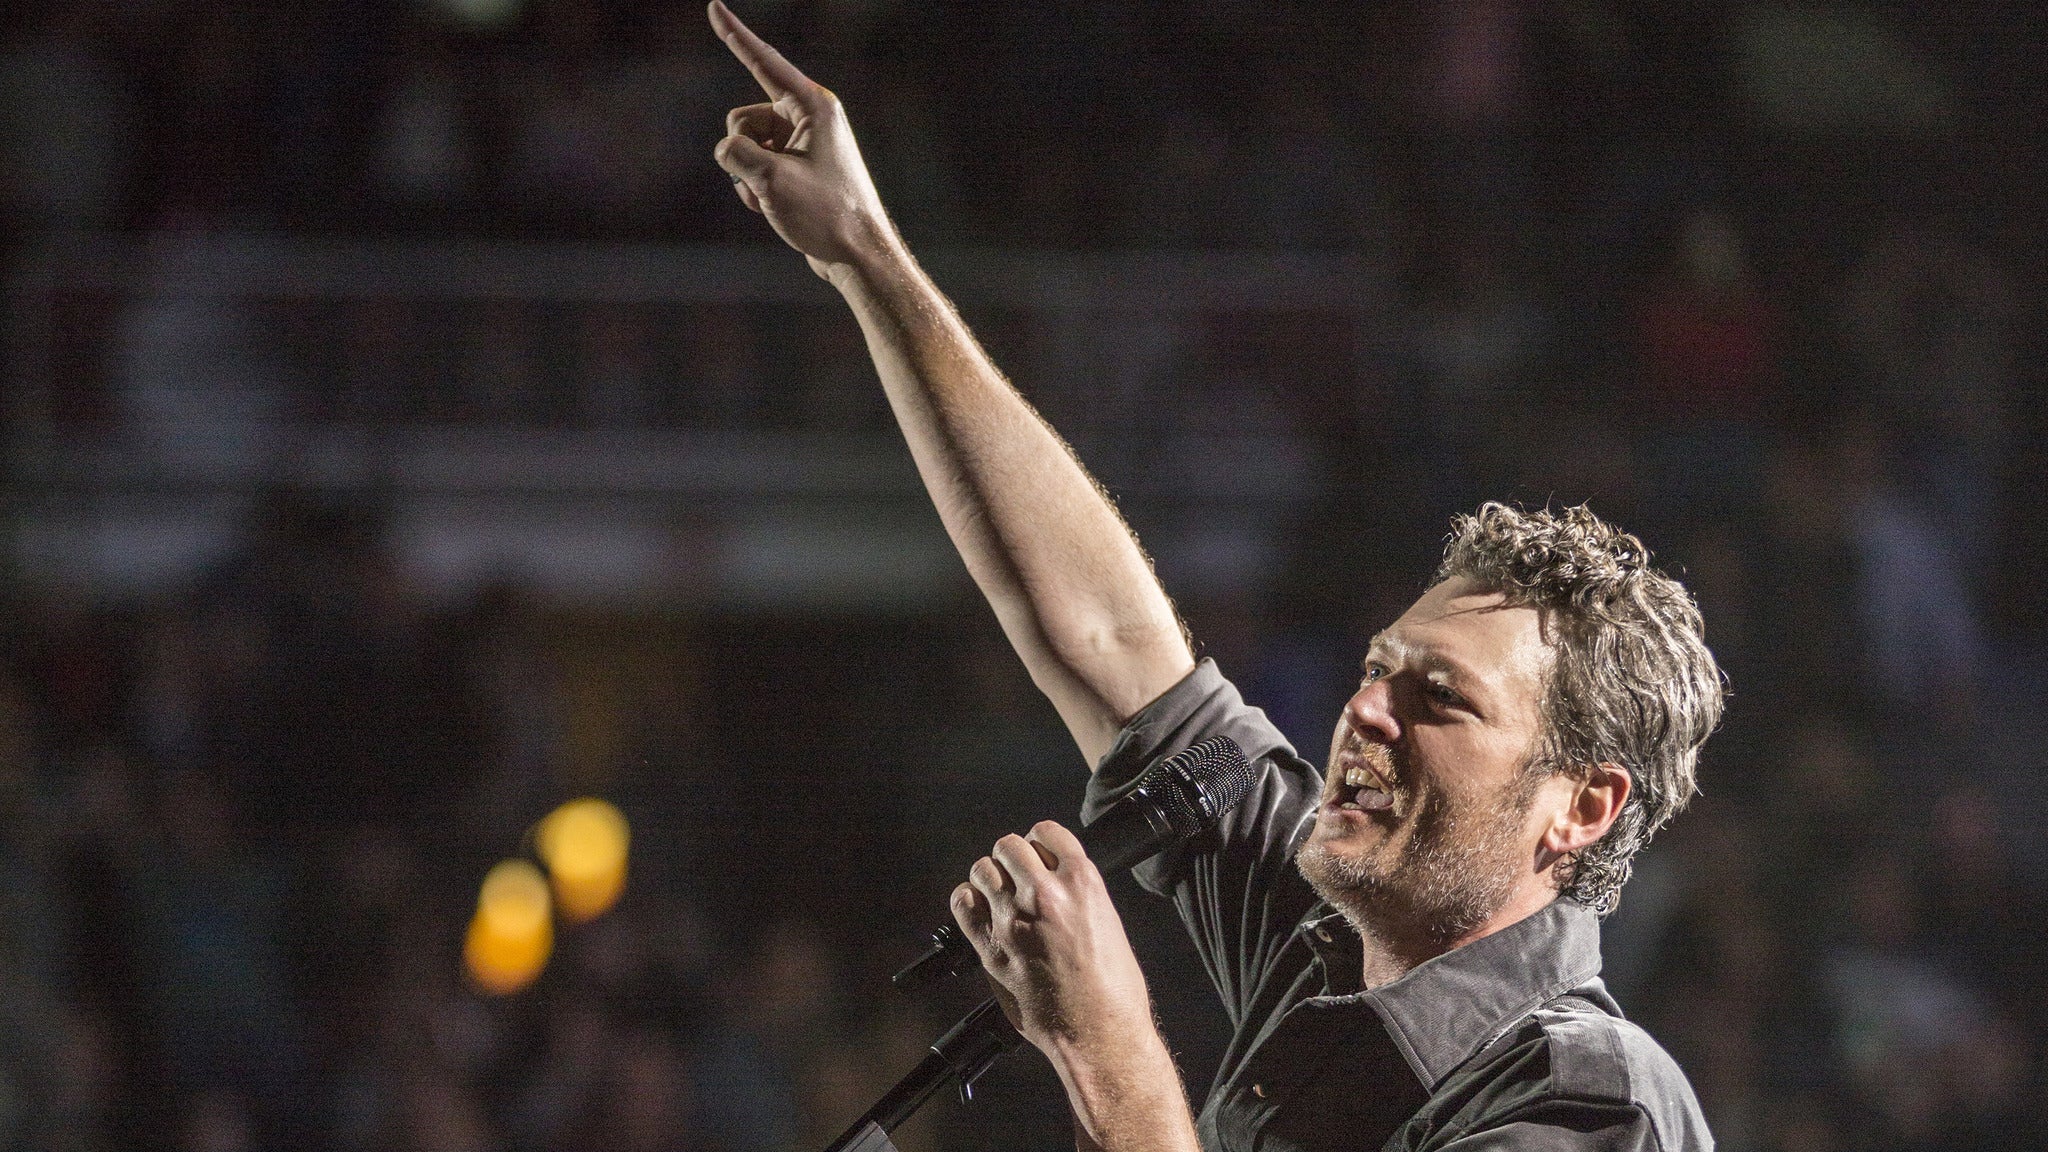 Blake Shelton: Friends and Heroes 2020